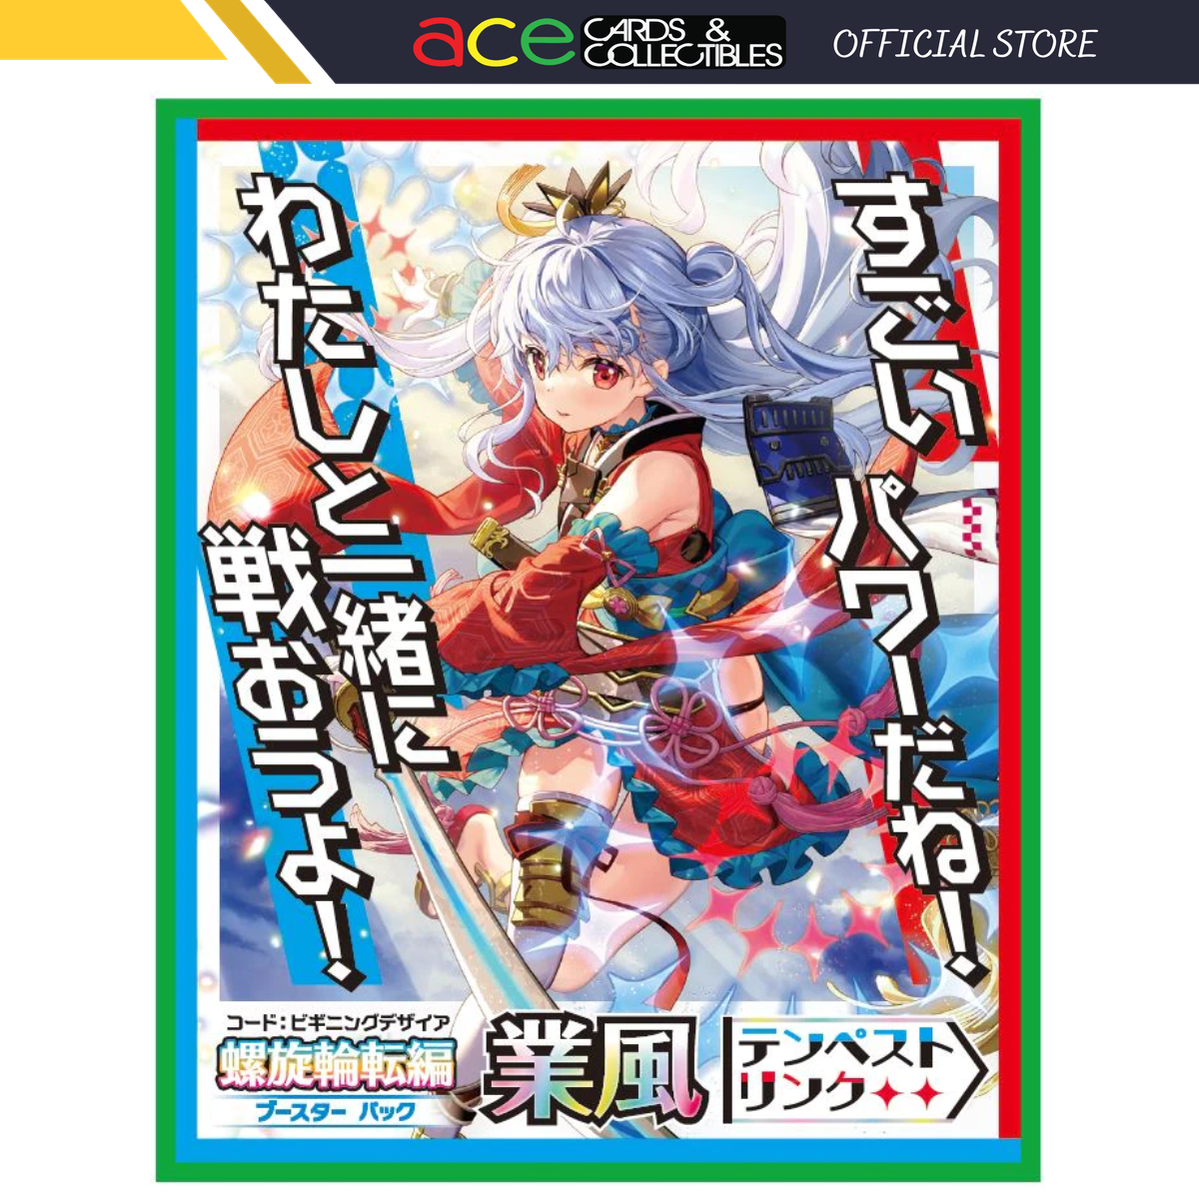 Z/X -Zillions of enemy X- Beginning Desire "Gofu" Tempest Link [ZX-B-46] (Japanese)-EX Pack (Random)-Broccoli-Ace Cards & Collectibles